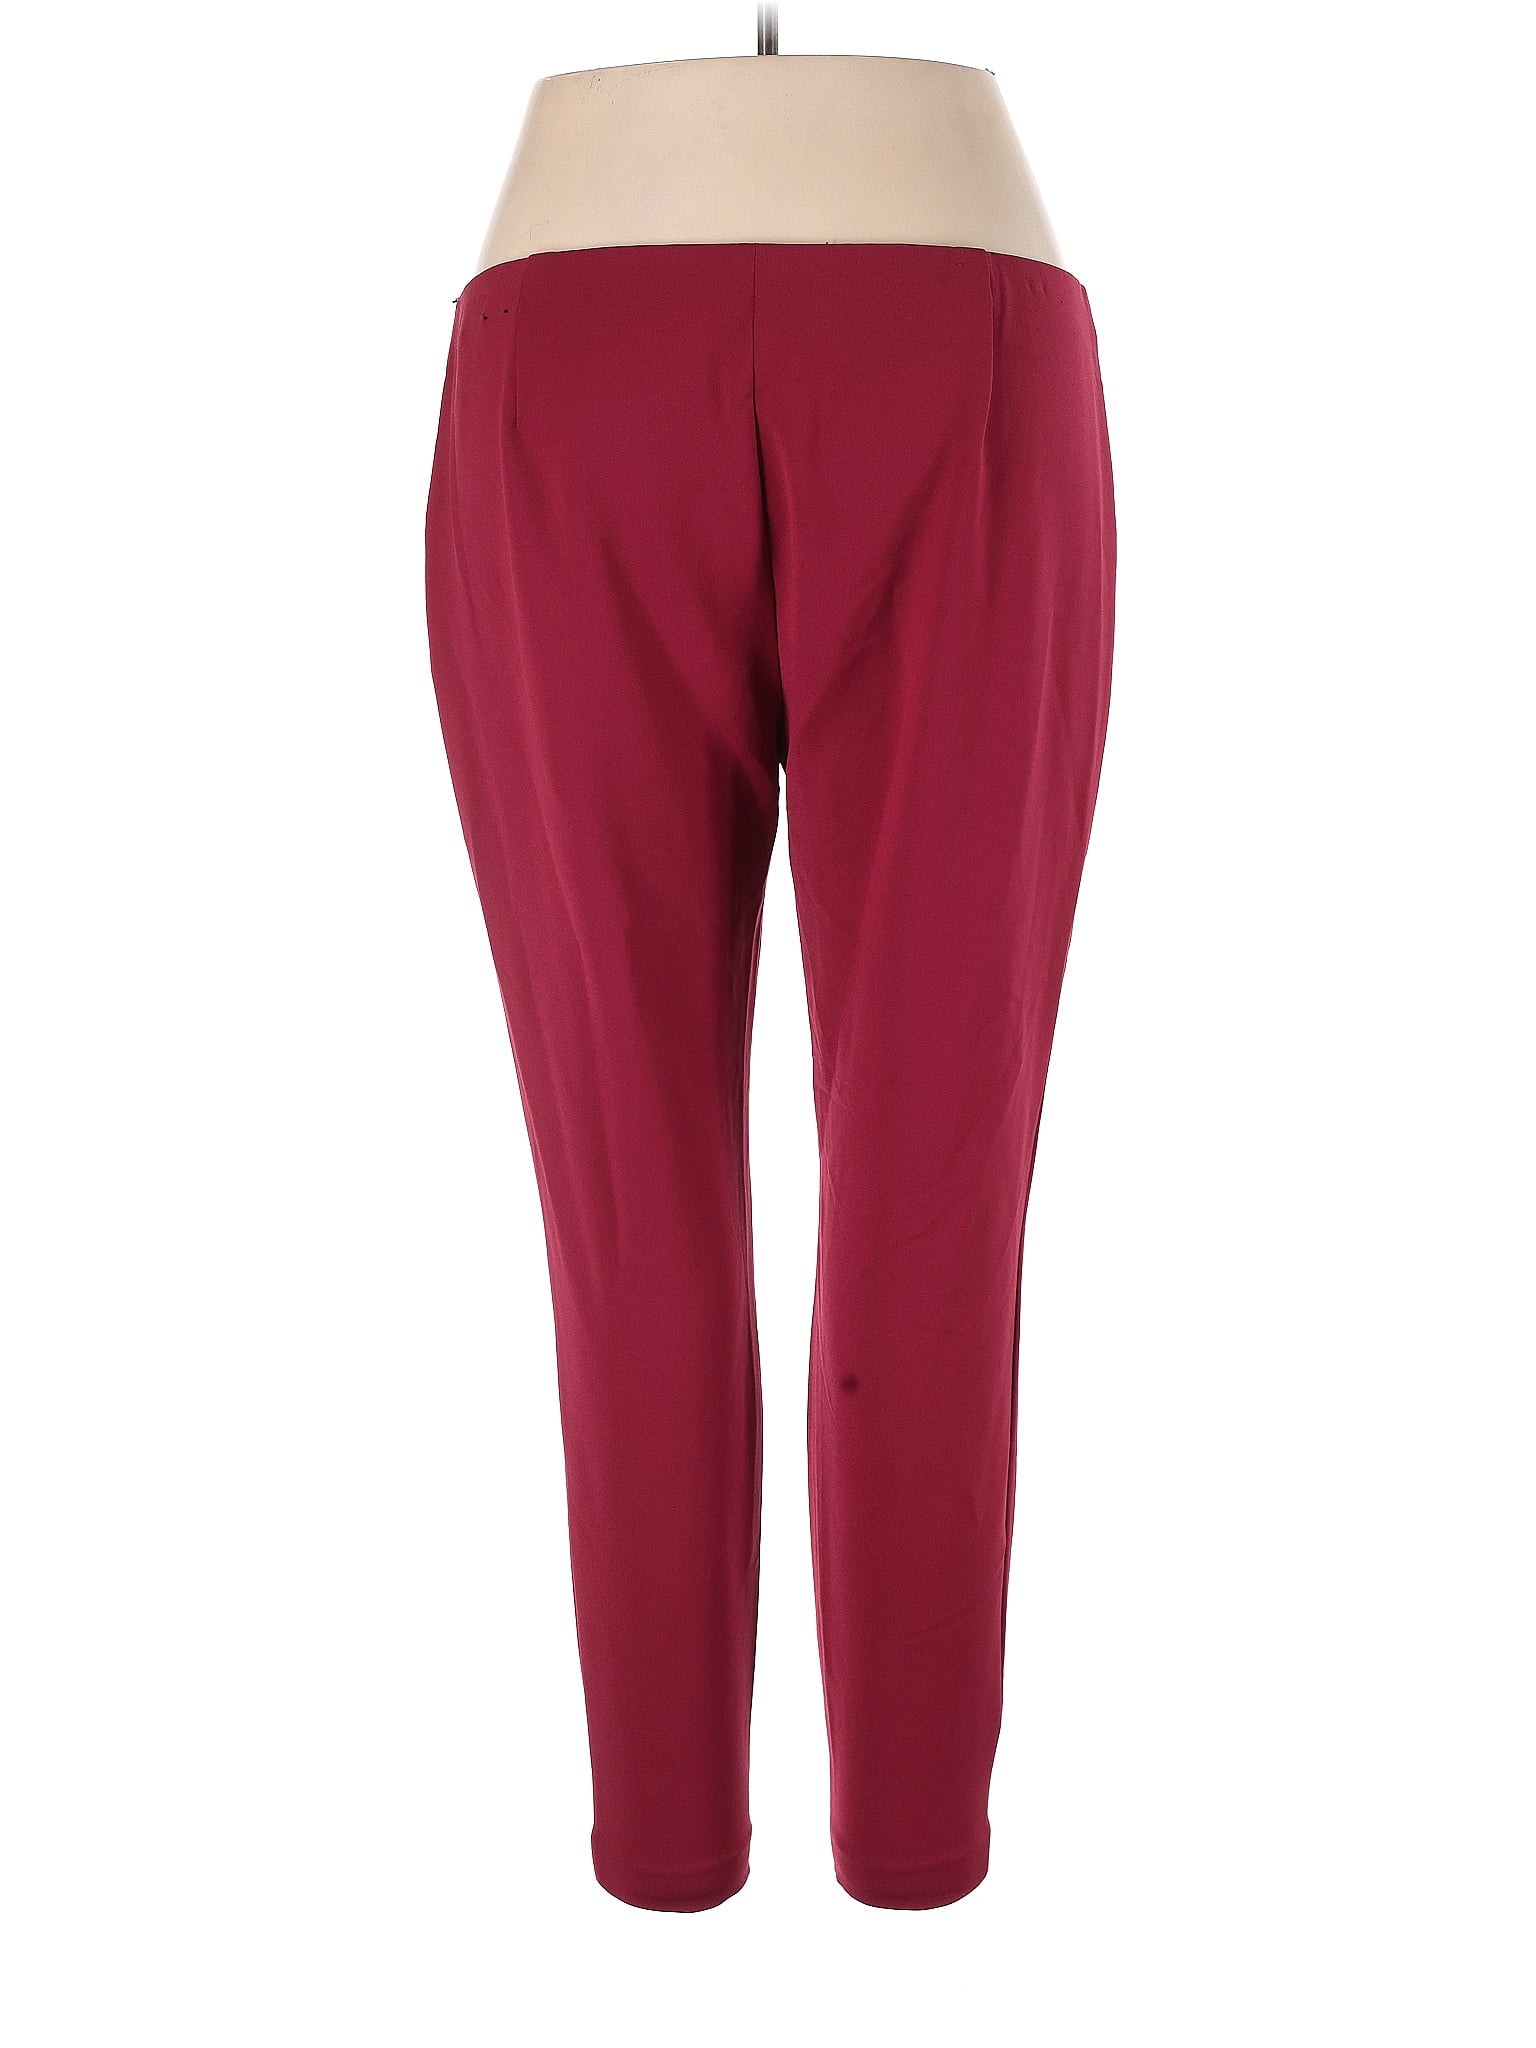 Express Solid Maroon Burgundy Casual Pants Size XL - 70% off